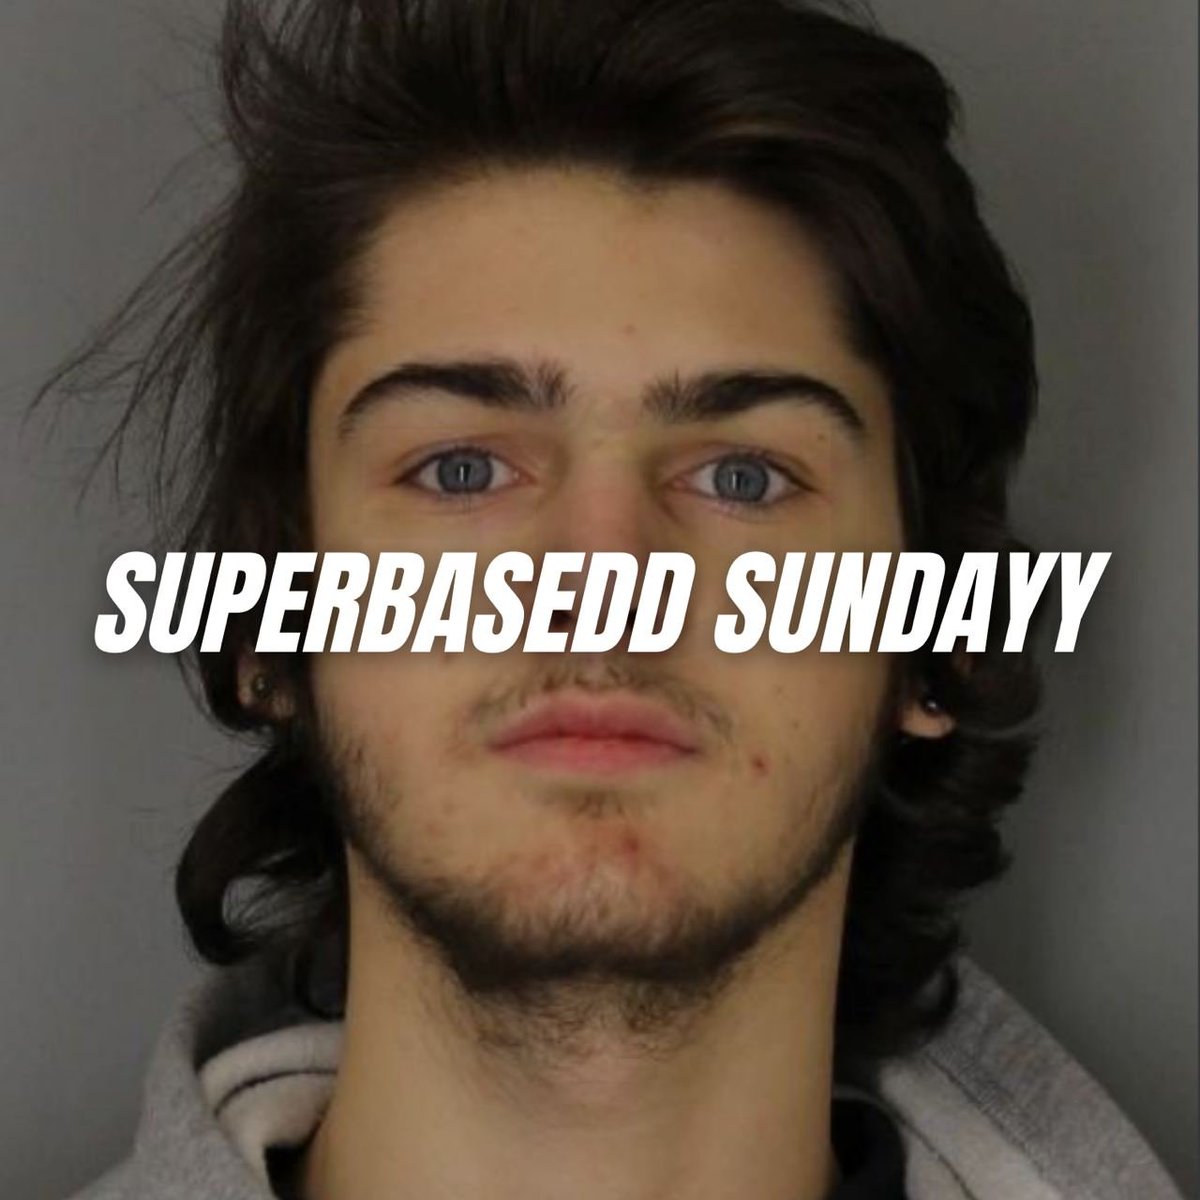 Happy Sunday mfers. What a time to be alive. @SUPERBASEDD